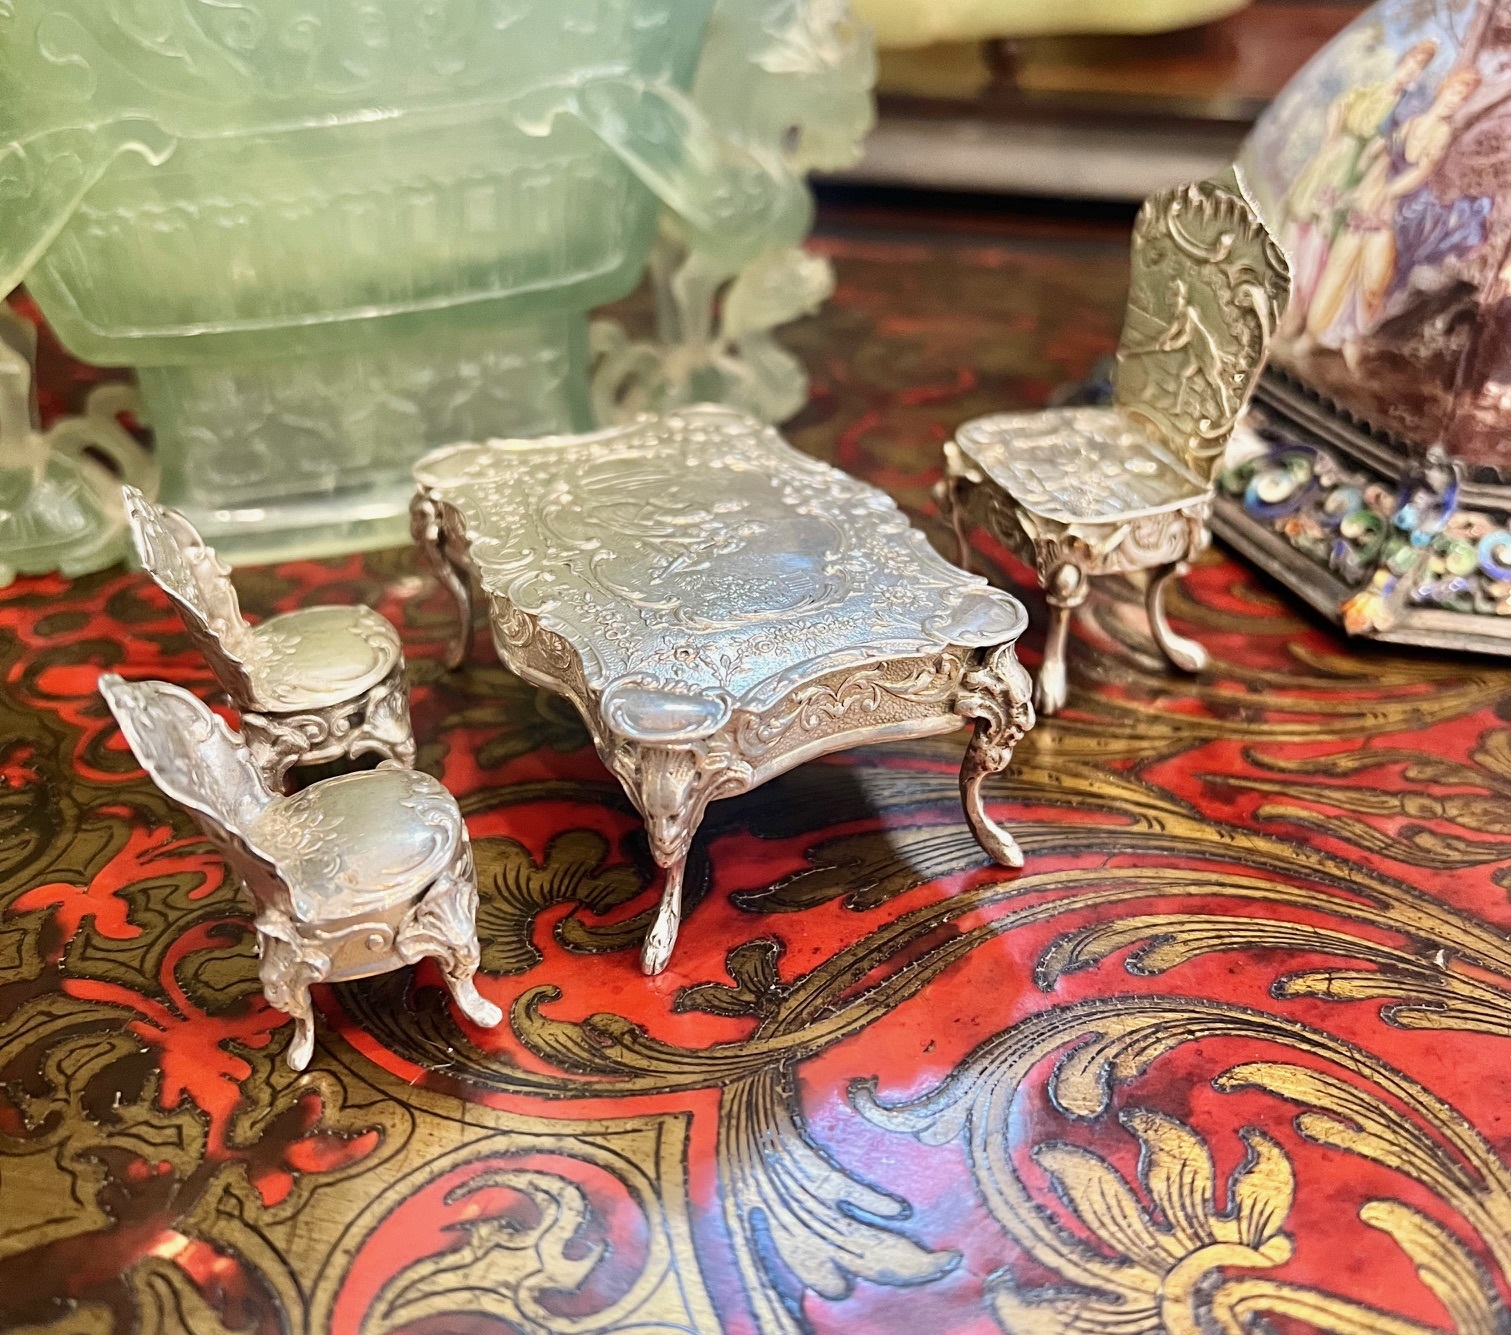 A SET OF EARLY 20TH CENTURY SILVER MINIATURE FURNITURE, C.1900